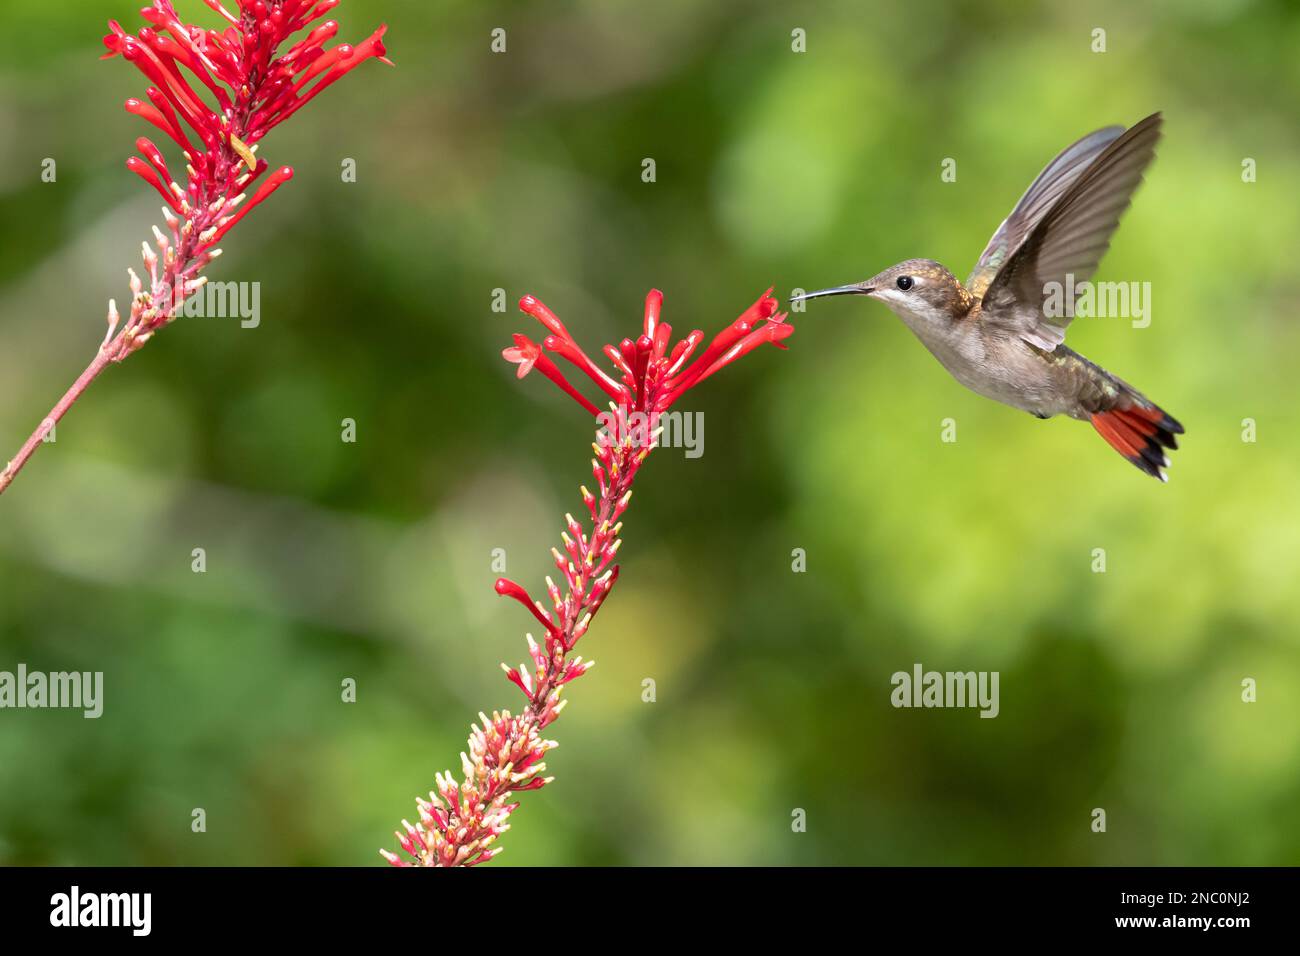 Ruby Topaz hummingbird, Chrysolampis Mosquitus, hovering next to red flowers in a garden on the Caribbean island of Trinidad. Stock Photo